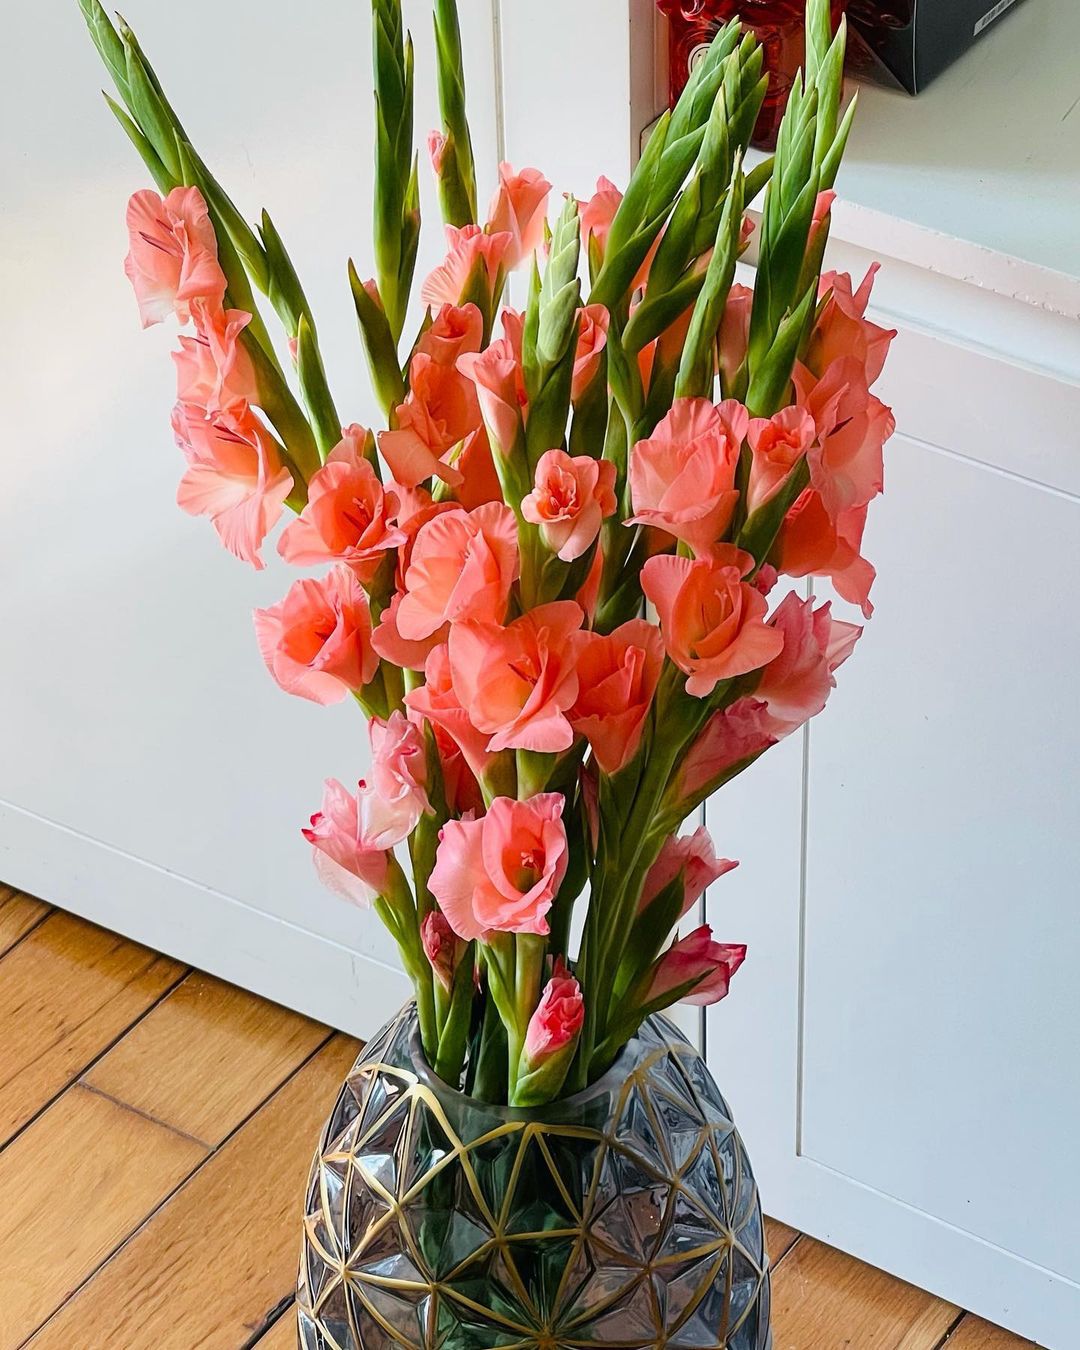 Top 30 Most Popular Types Of Gladiolus Pictorial Guide